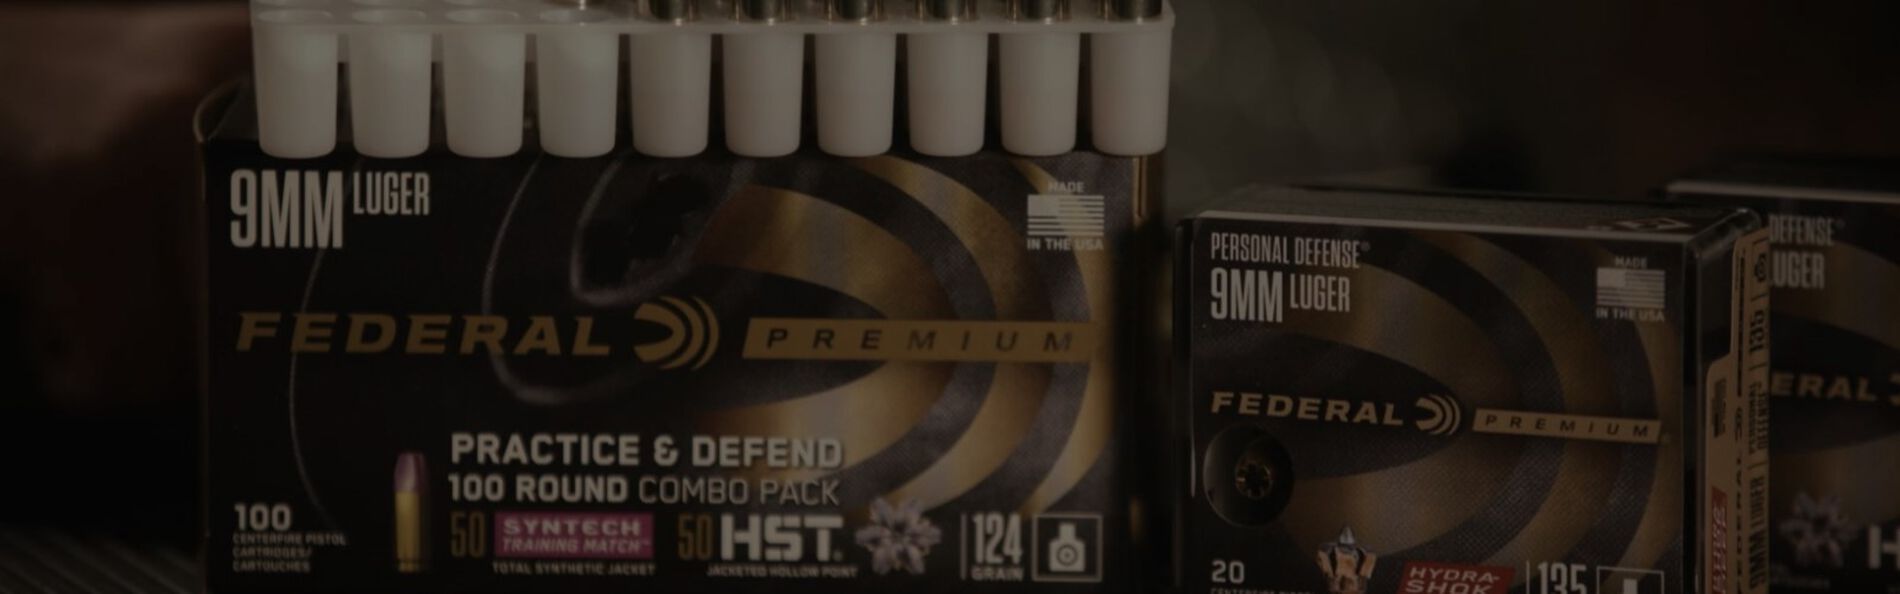 Federal Premium Ammunition packaging and cartridges